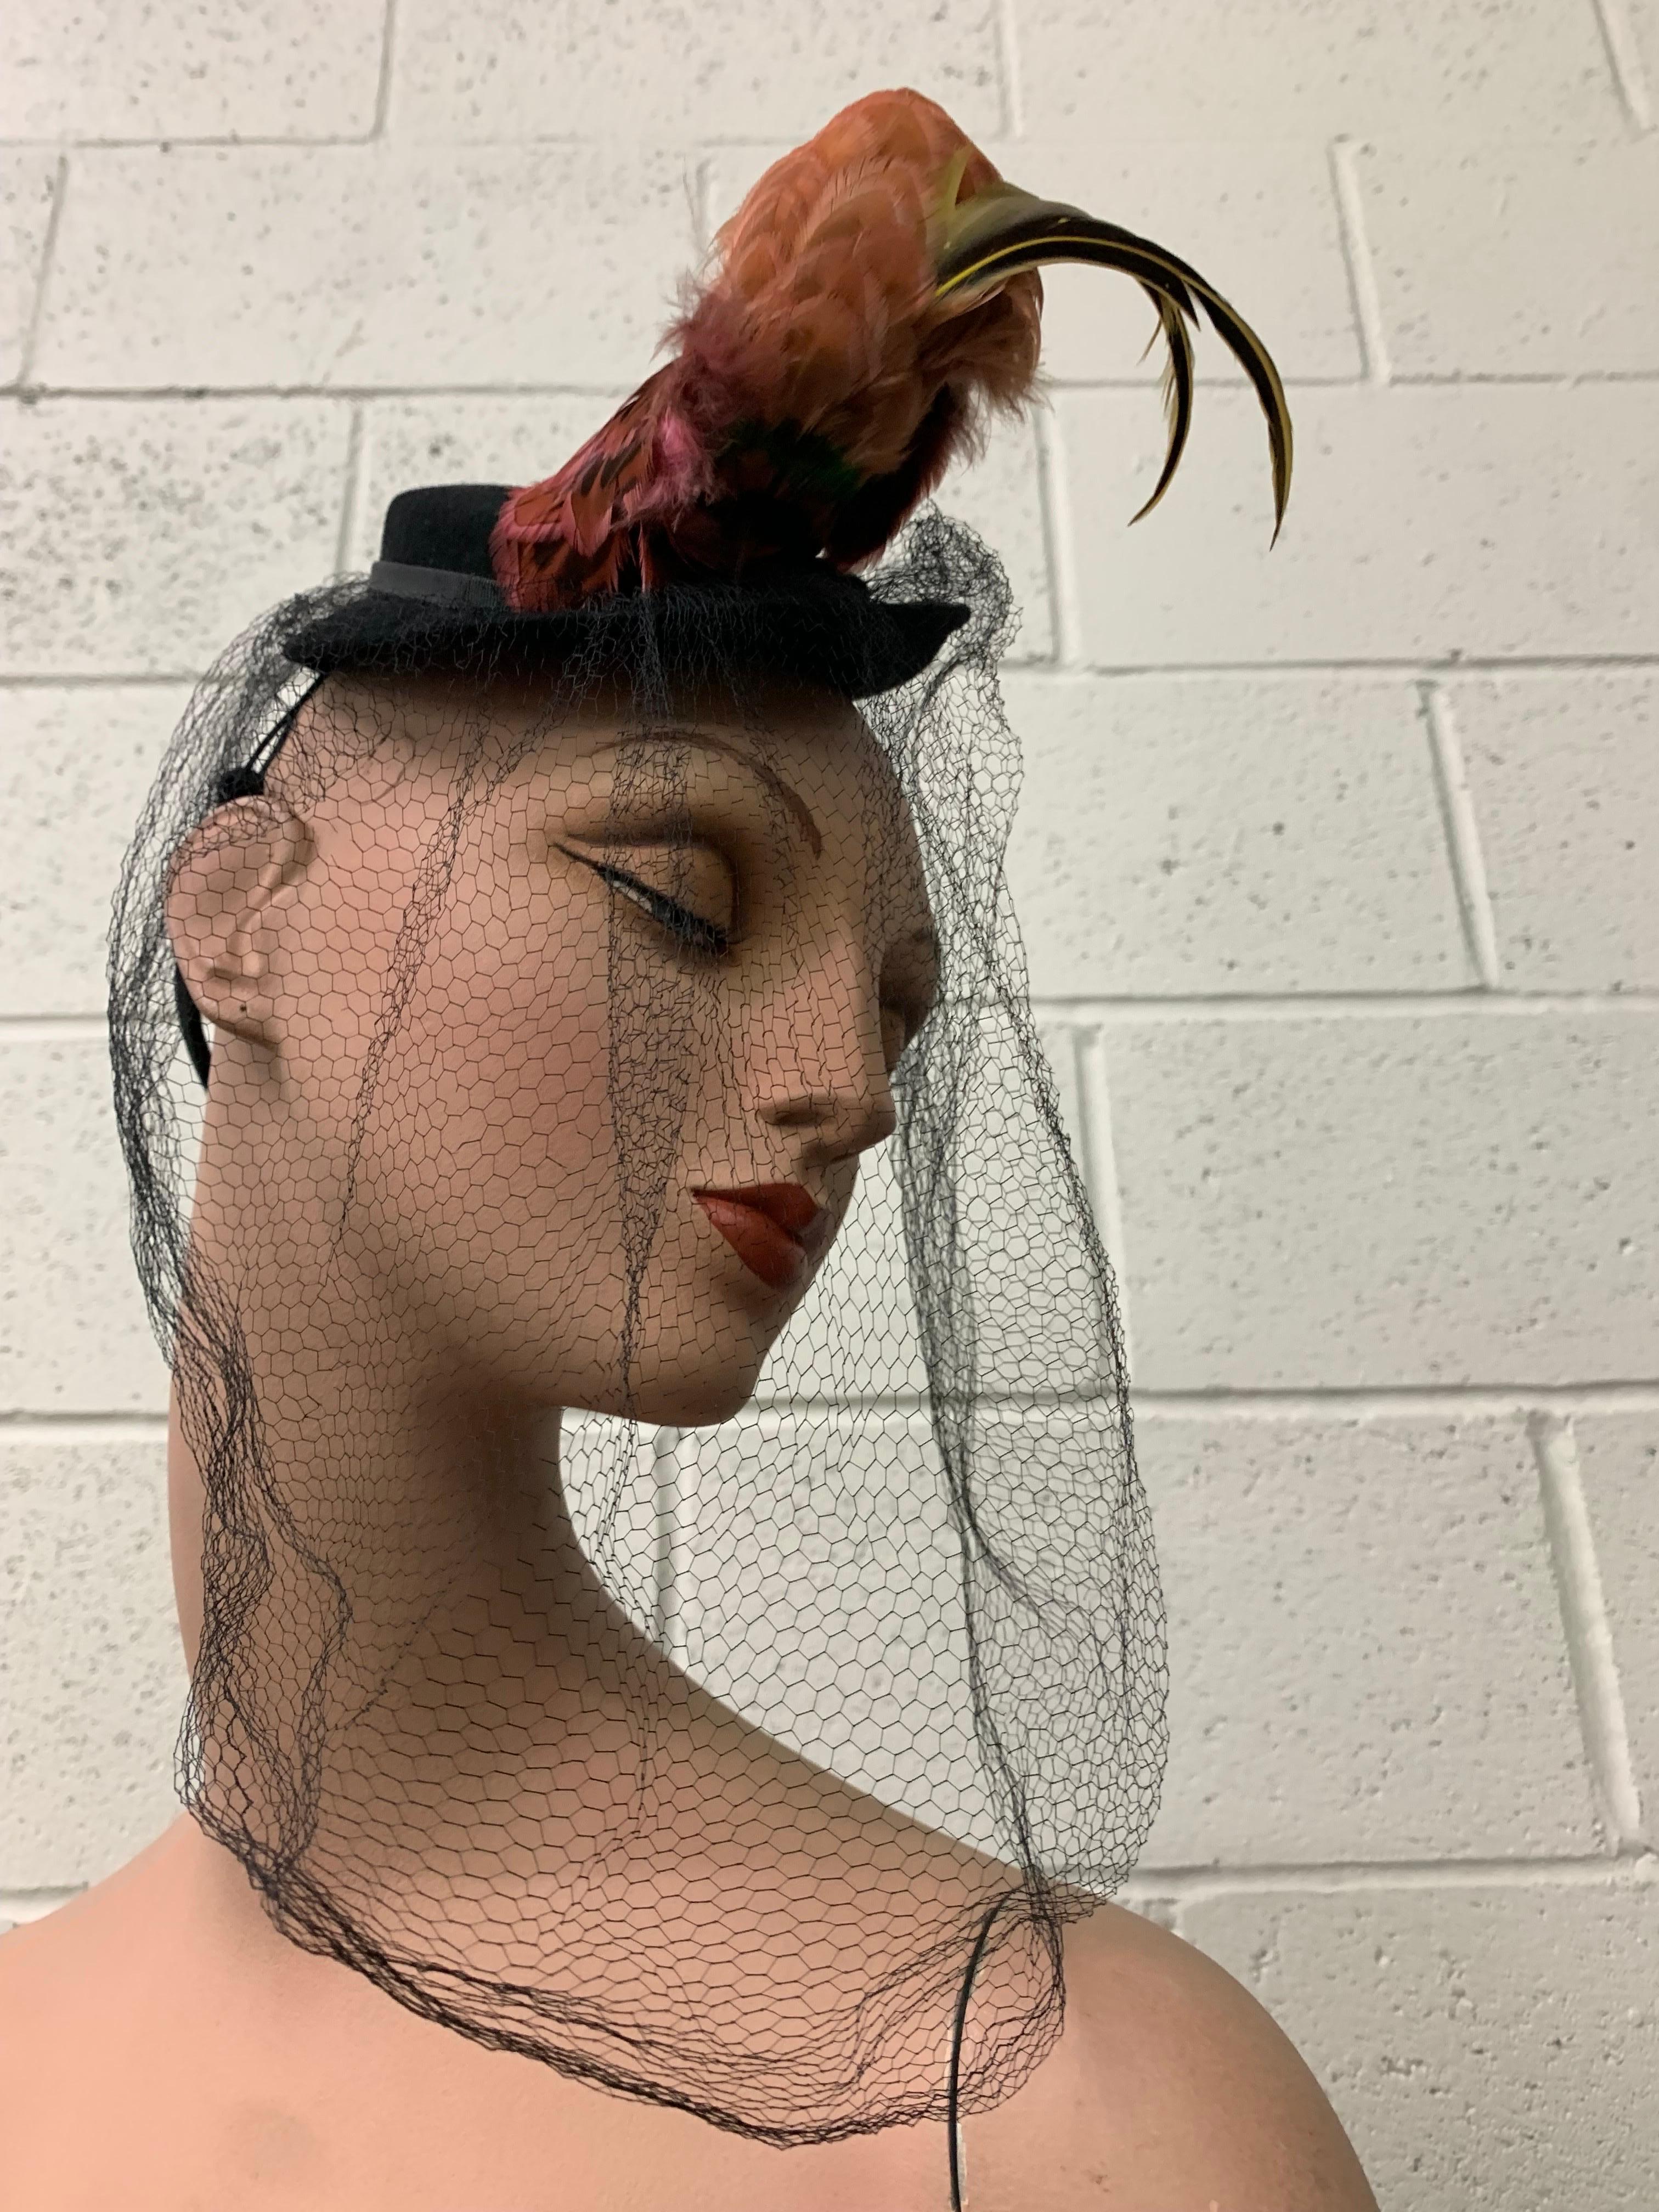 1940s Mathilde Model Black Felt Tilt Toy Hat w Exotic Feather Spray & Veil:  Feather detail is styled like a bird with an upright stance. Full black dramatic veil. Back of felt hat is paisley shaped for back interest. One Size Fits All. 